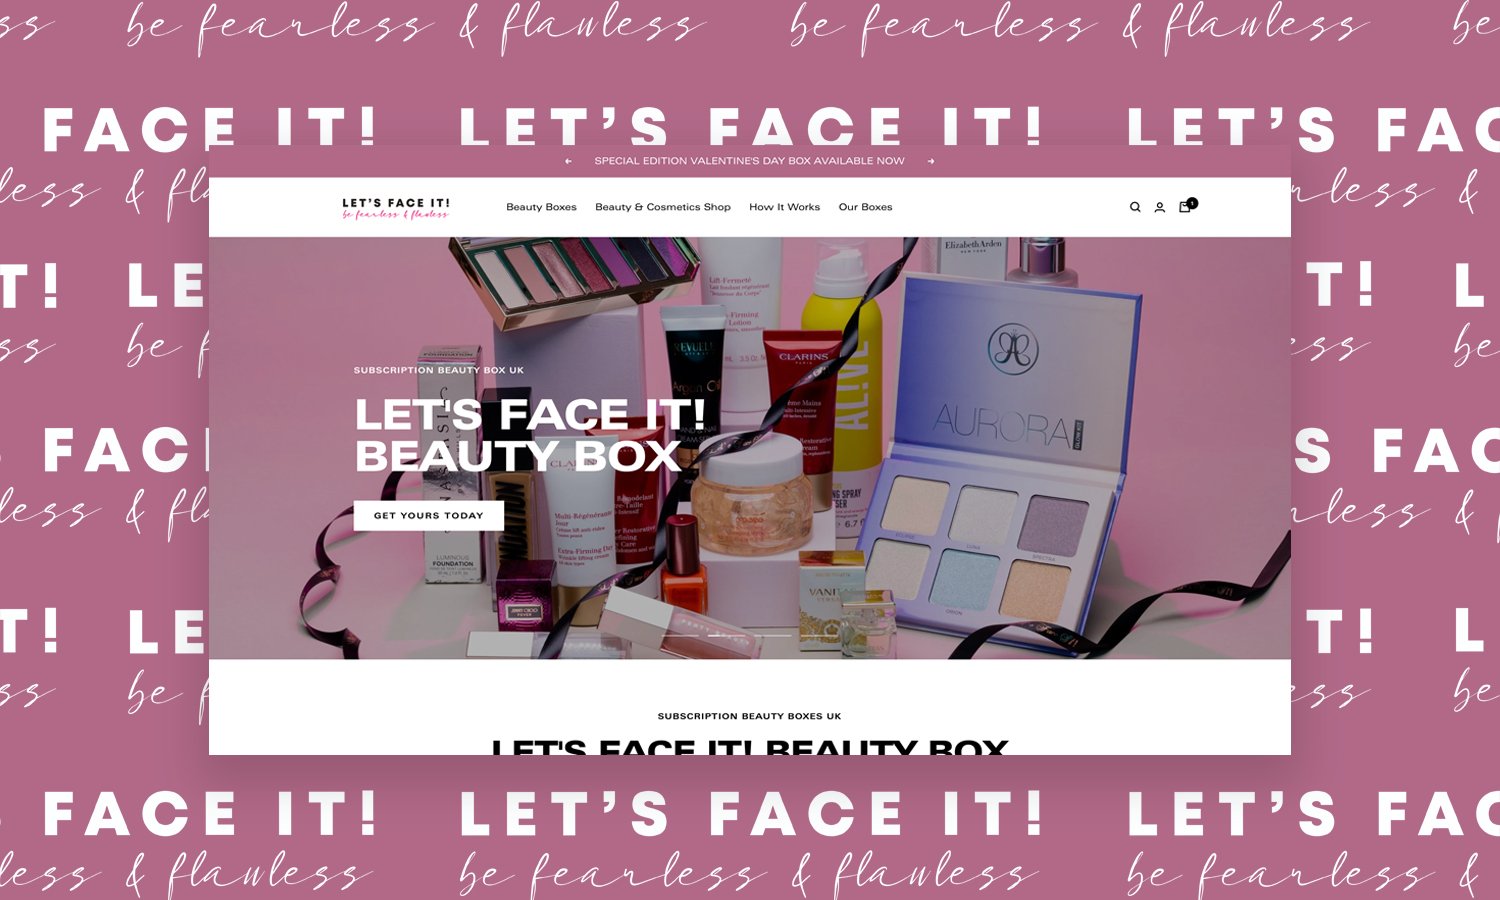 Let's Face It! Beauty Box Website Homepage